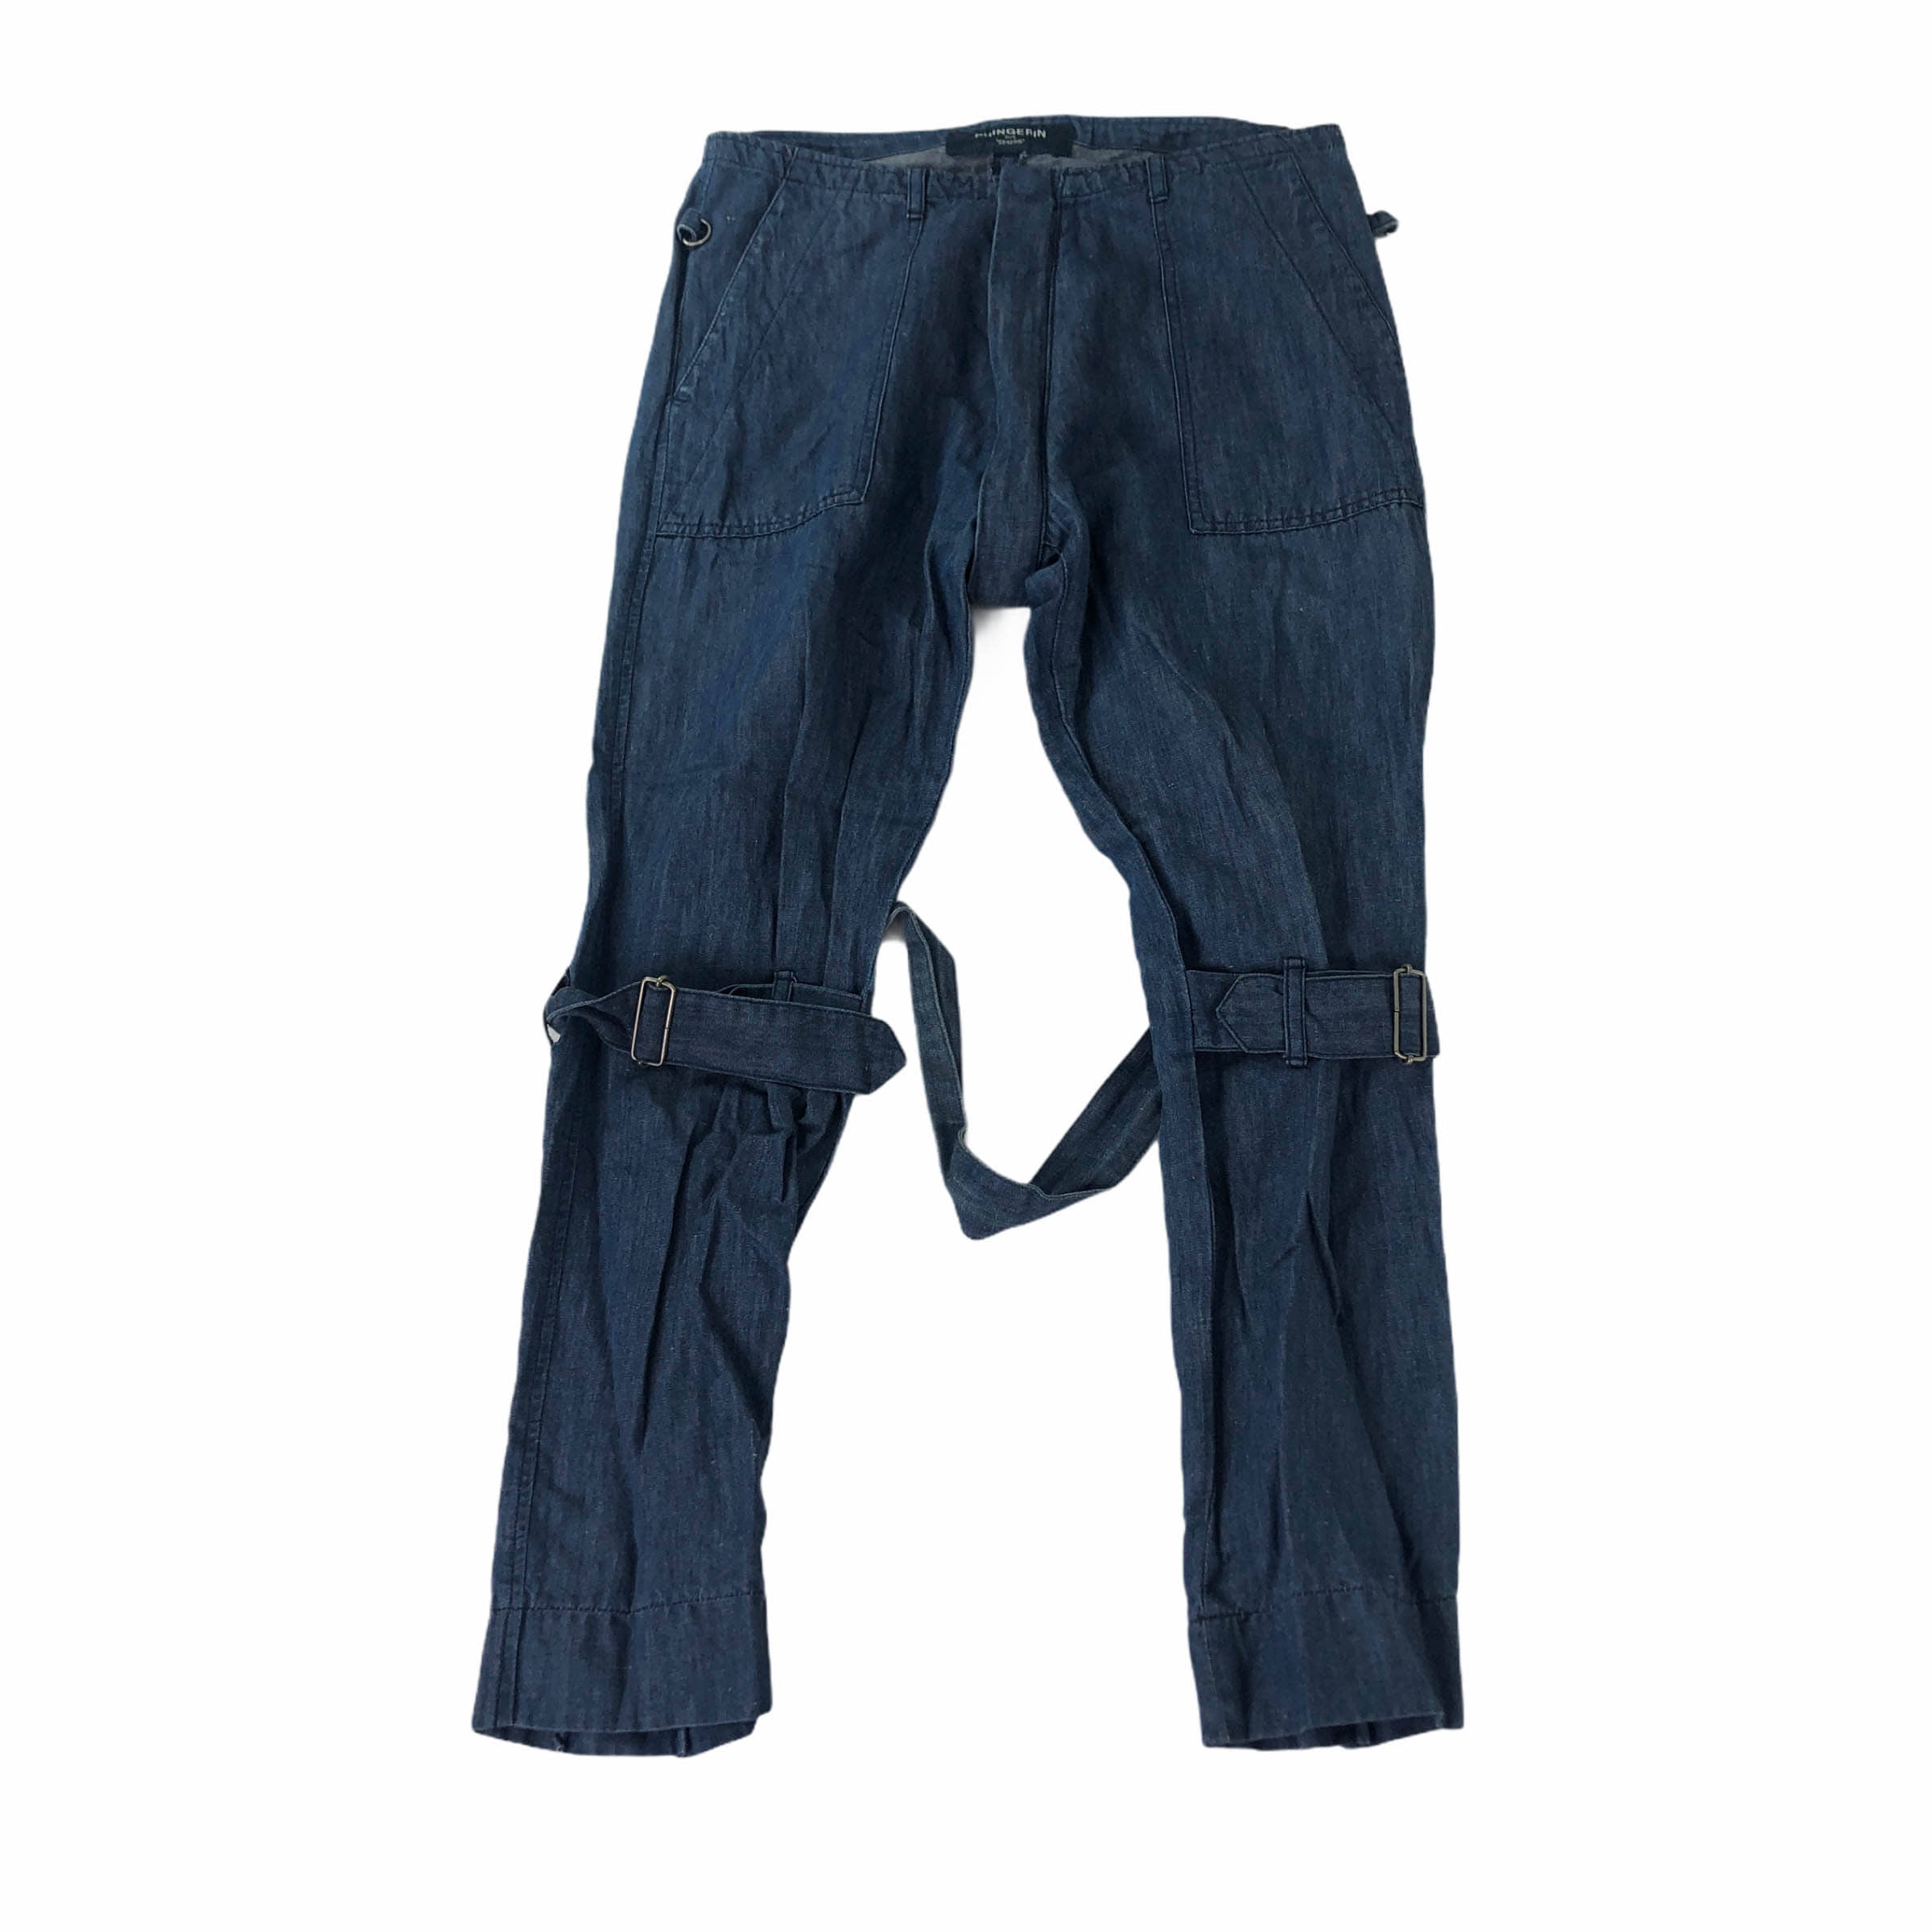 [Phingerin] Zipup Jeans - Size S